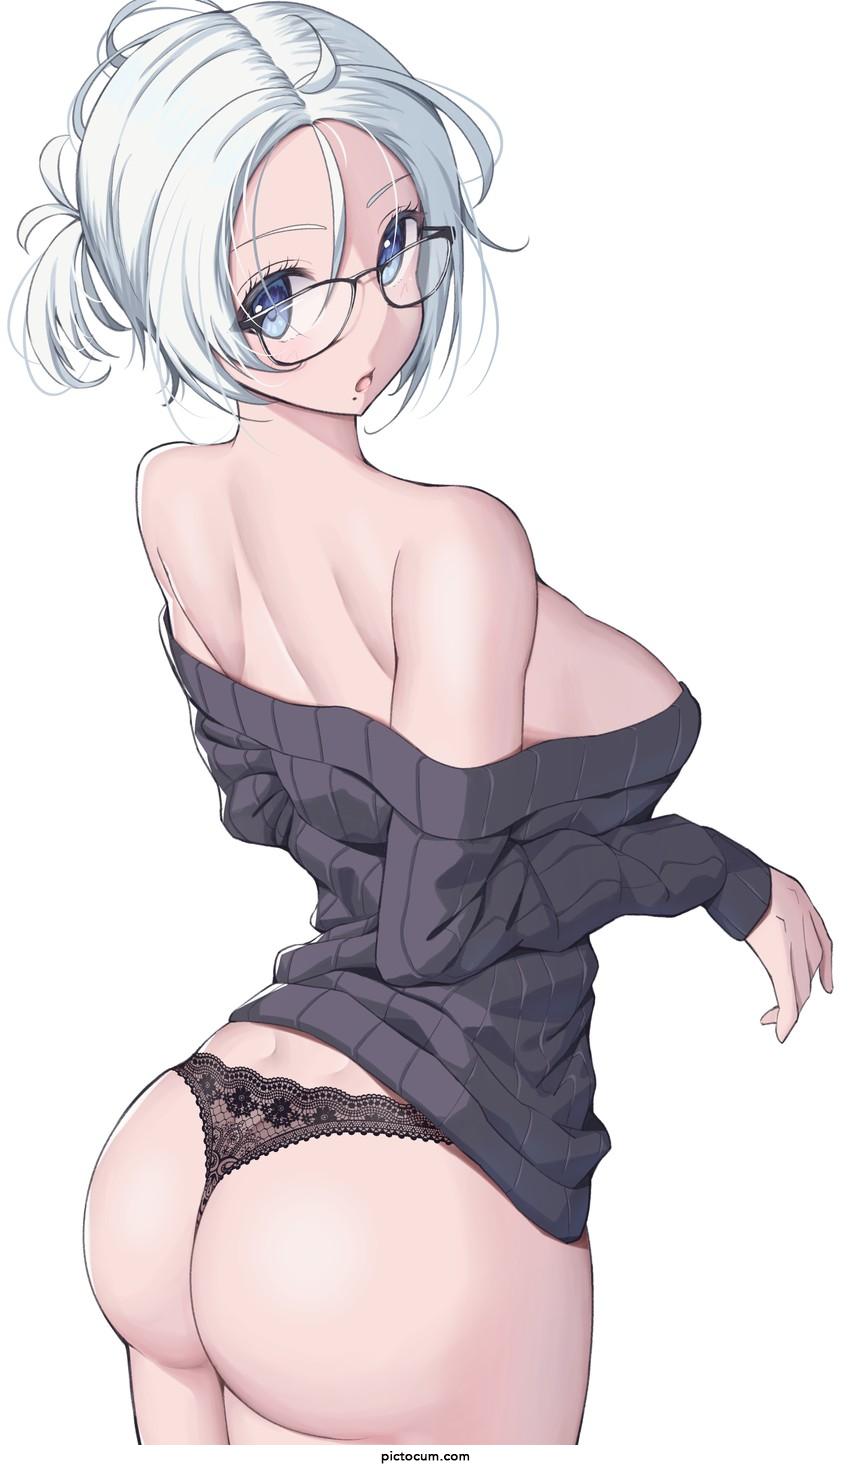 Glasses and asses